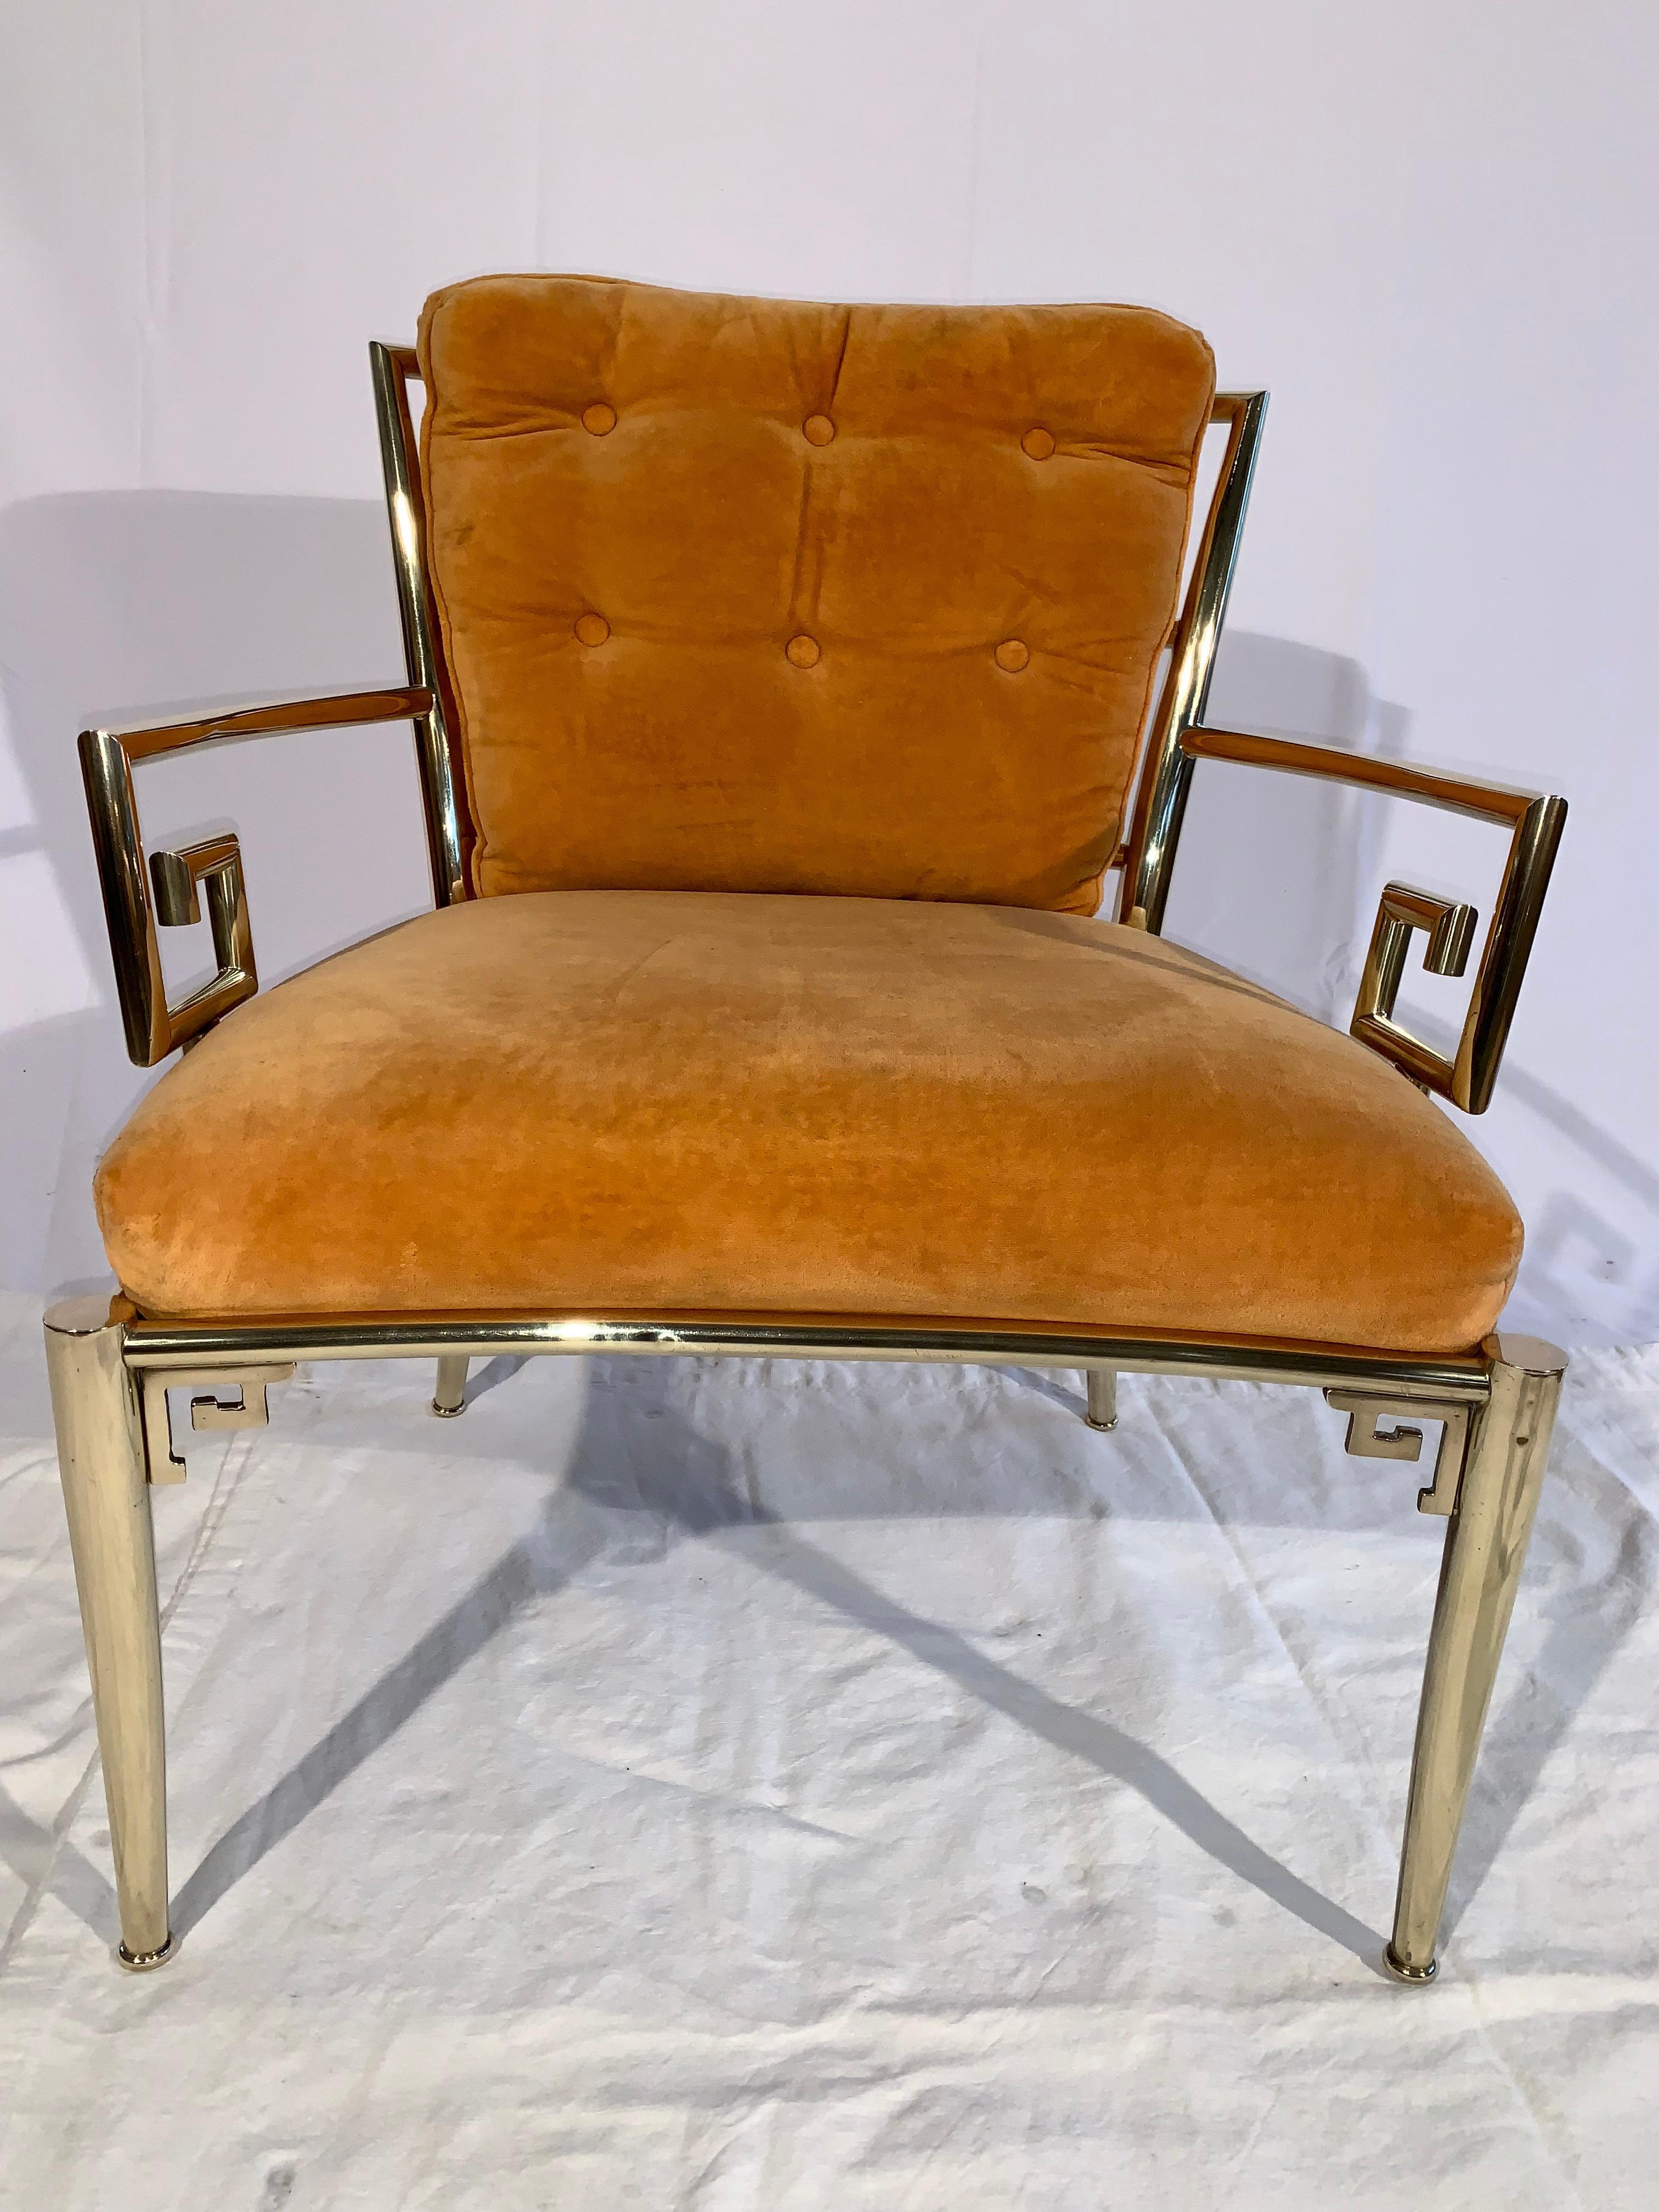 A pair of solid brass armchairs by Mastercraft Furniture, circa 1970.
The chairs were hand made in Italy and are constructed of sold brass with upholstered cushions.
This pair was recently professionally stripped. Hand polished and re